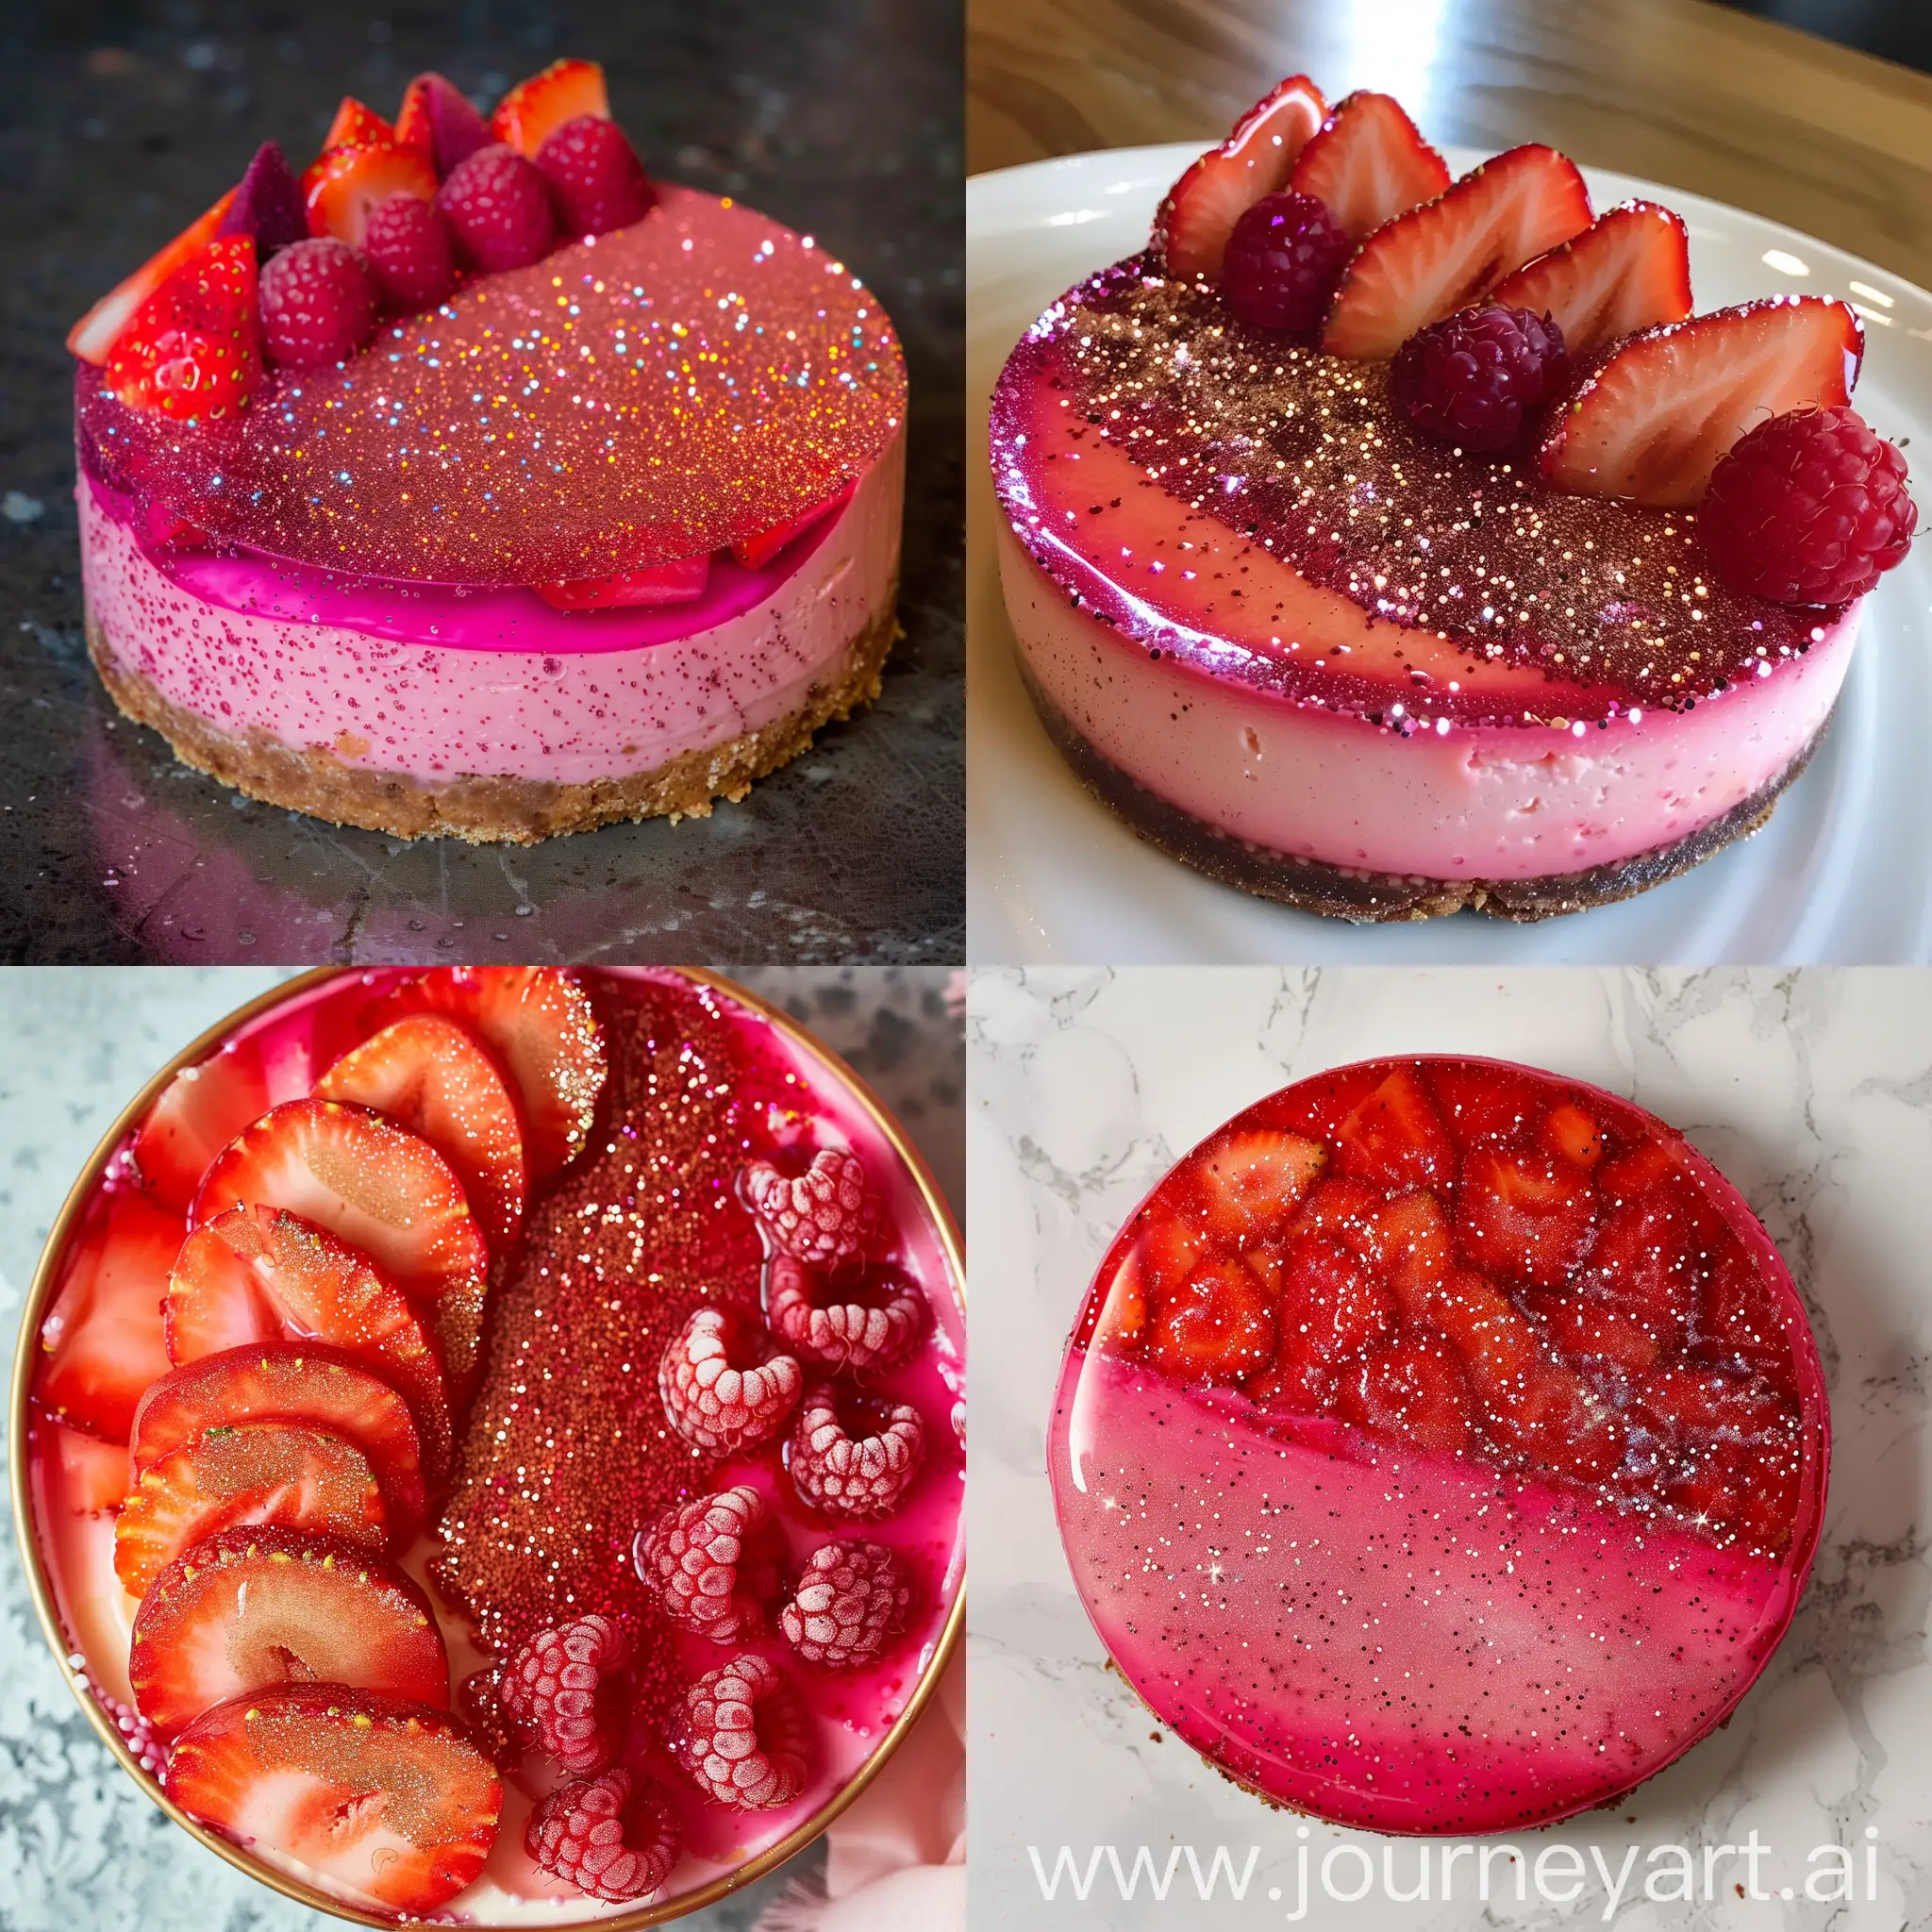 Delicious-Red-and-Pink-Ombre-Cheesecake-with-Edible-Glitter